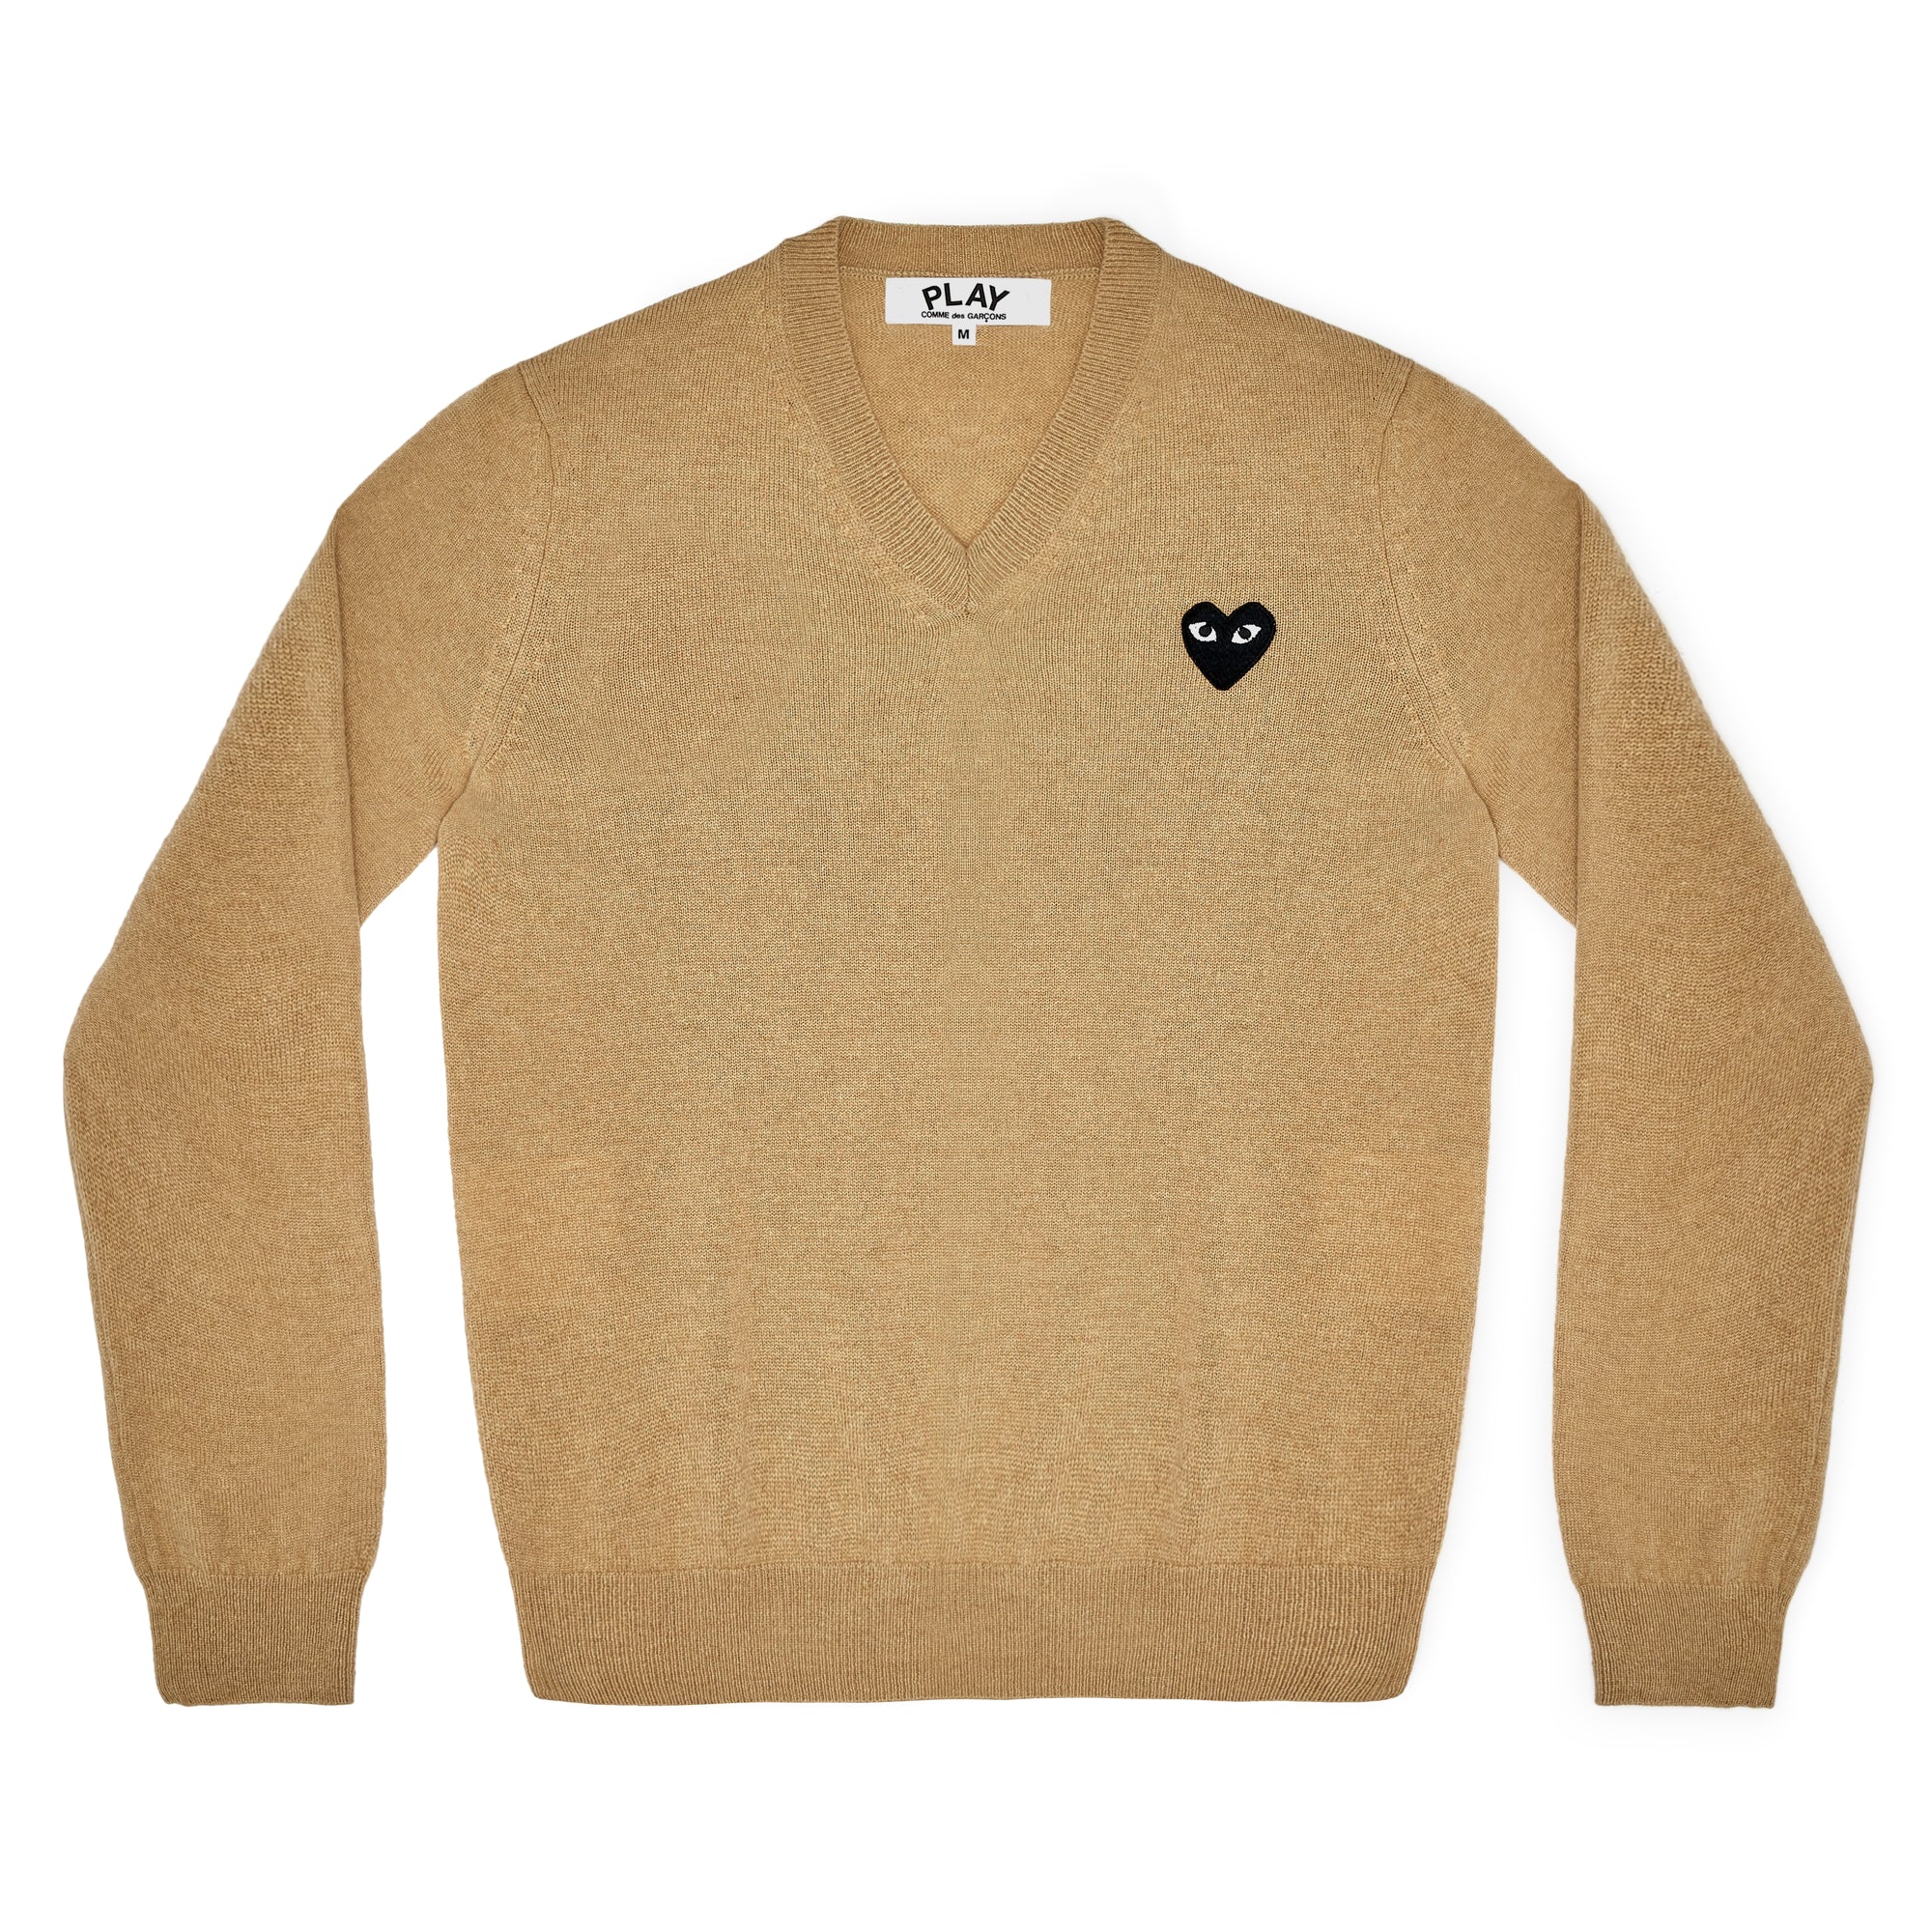 PLAY CDG - BLACK HEART V NECK SWEATER - (BEIGE) view 1